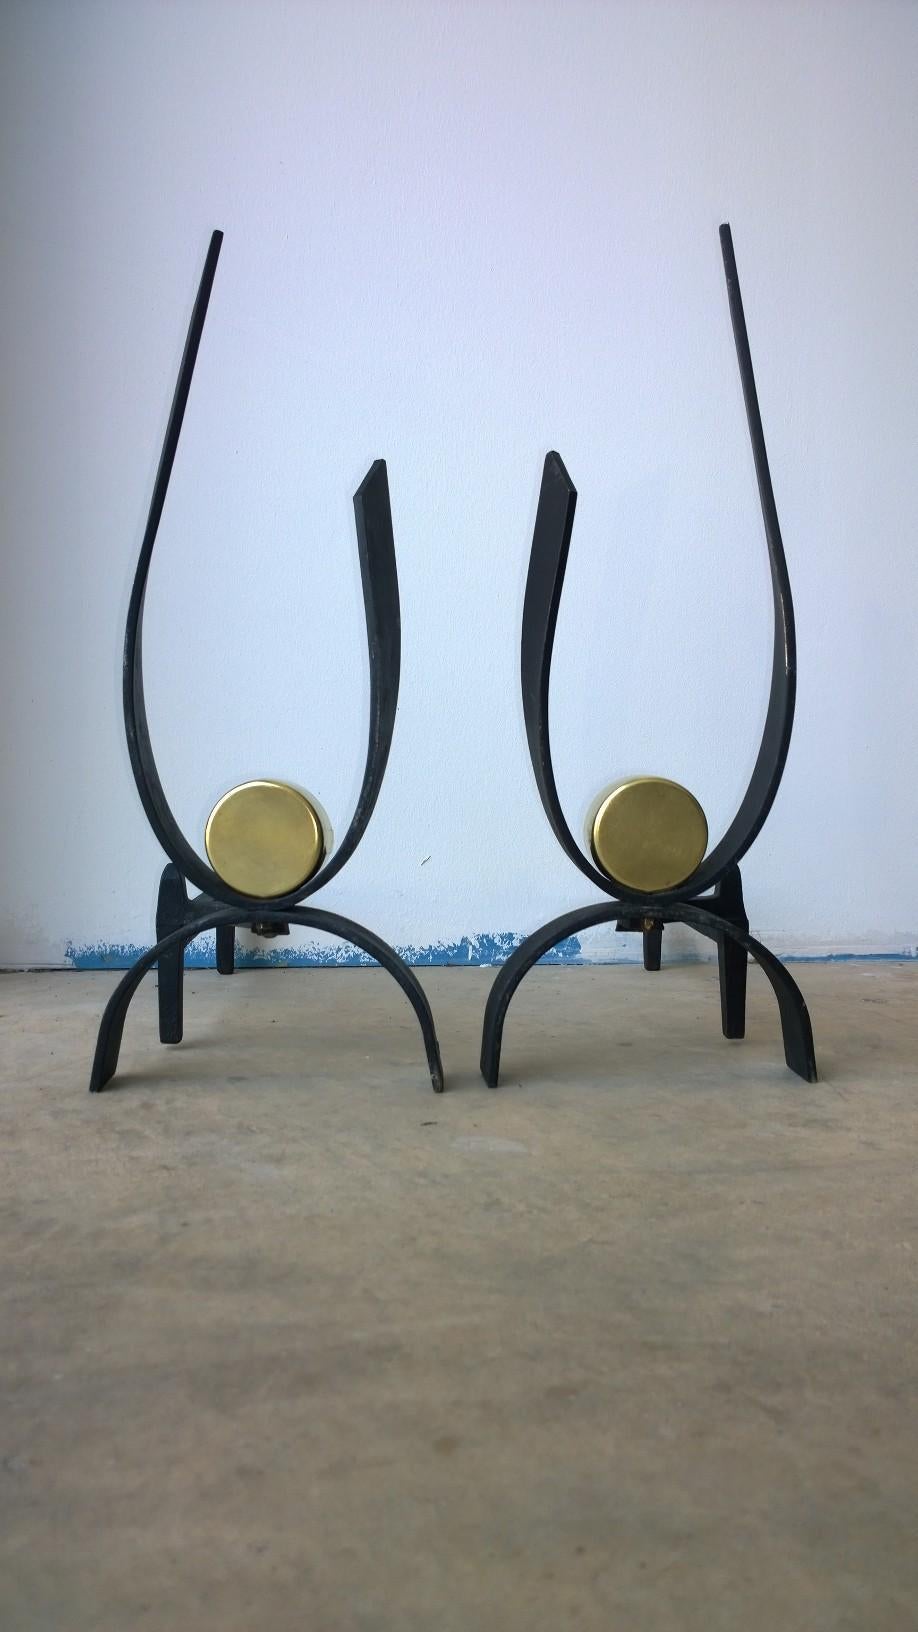 Offered is a pair of metal and brass Mid-Century Modern fireplace andirons by Donald Deskey. The pair are an elegant design with clean modern lines with just a touch of shiny brass. Even without a 